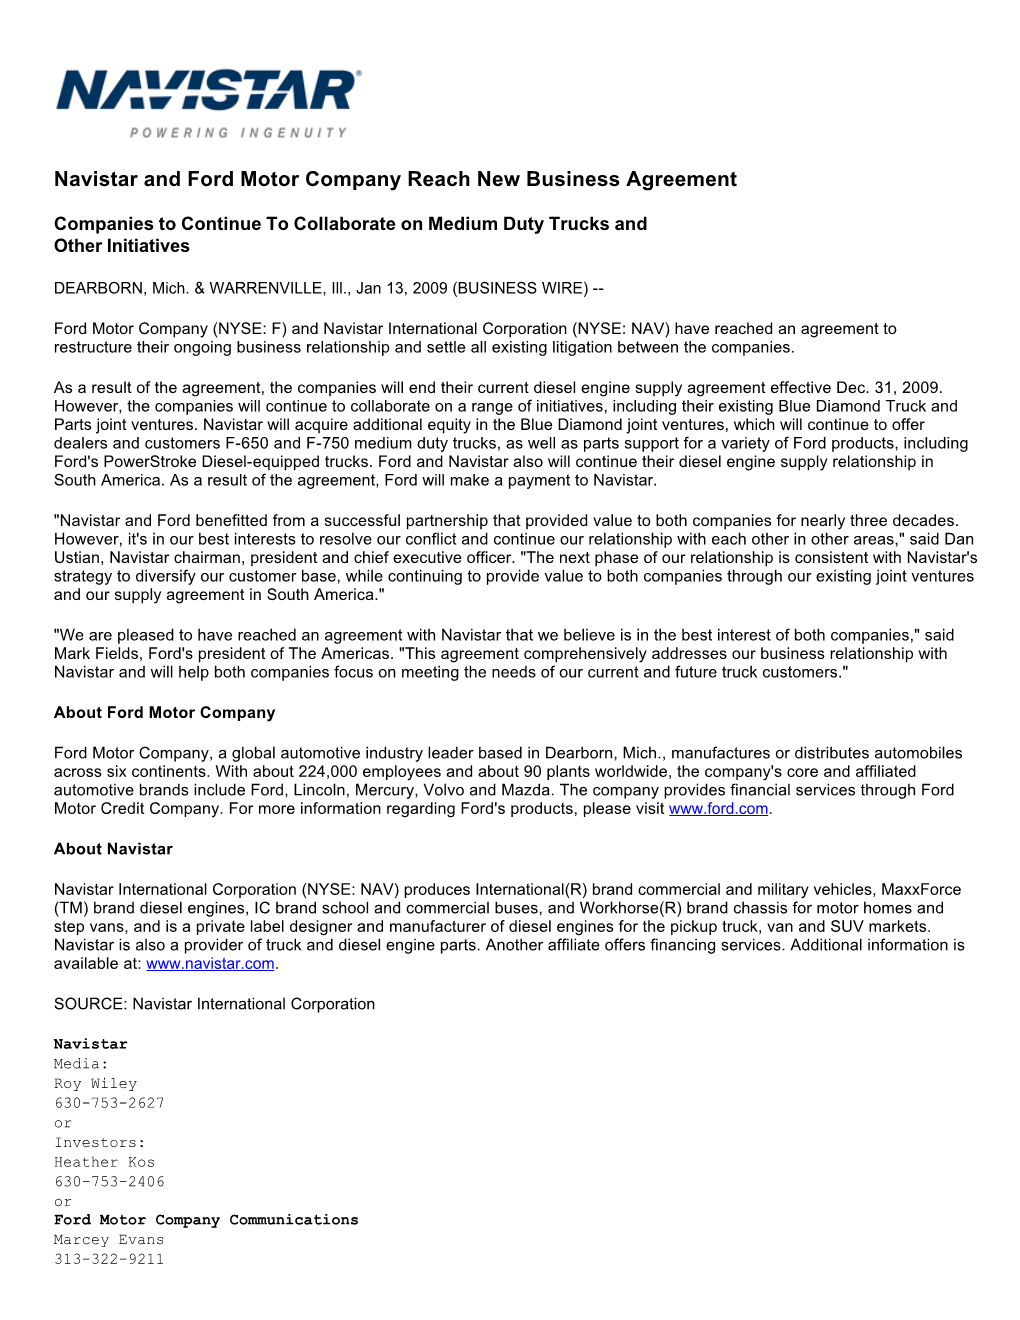 Navistar and Ford Motor Company Reach New Business Agreement